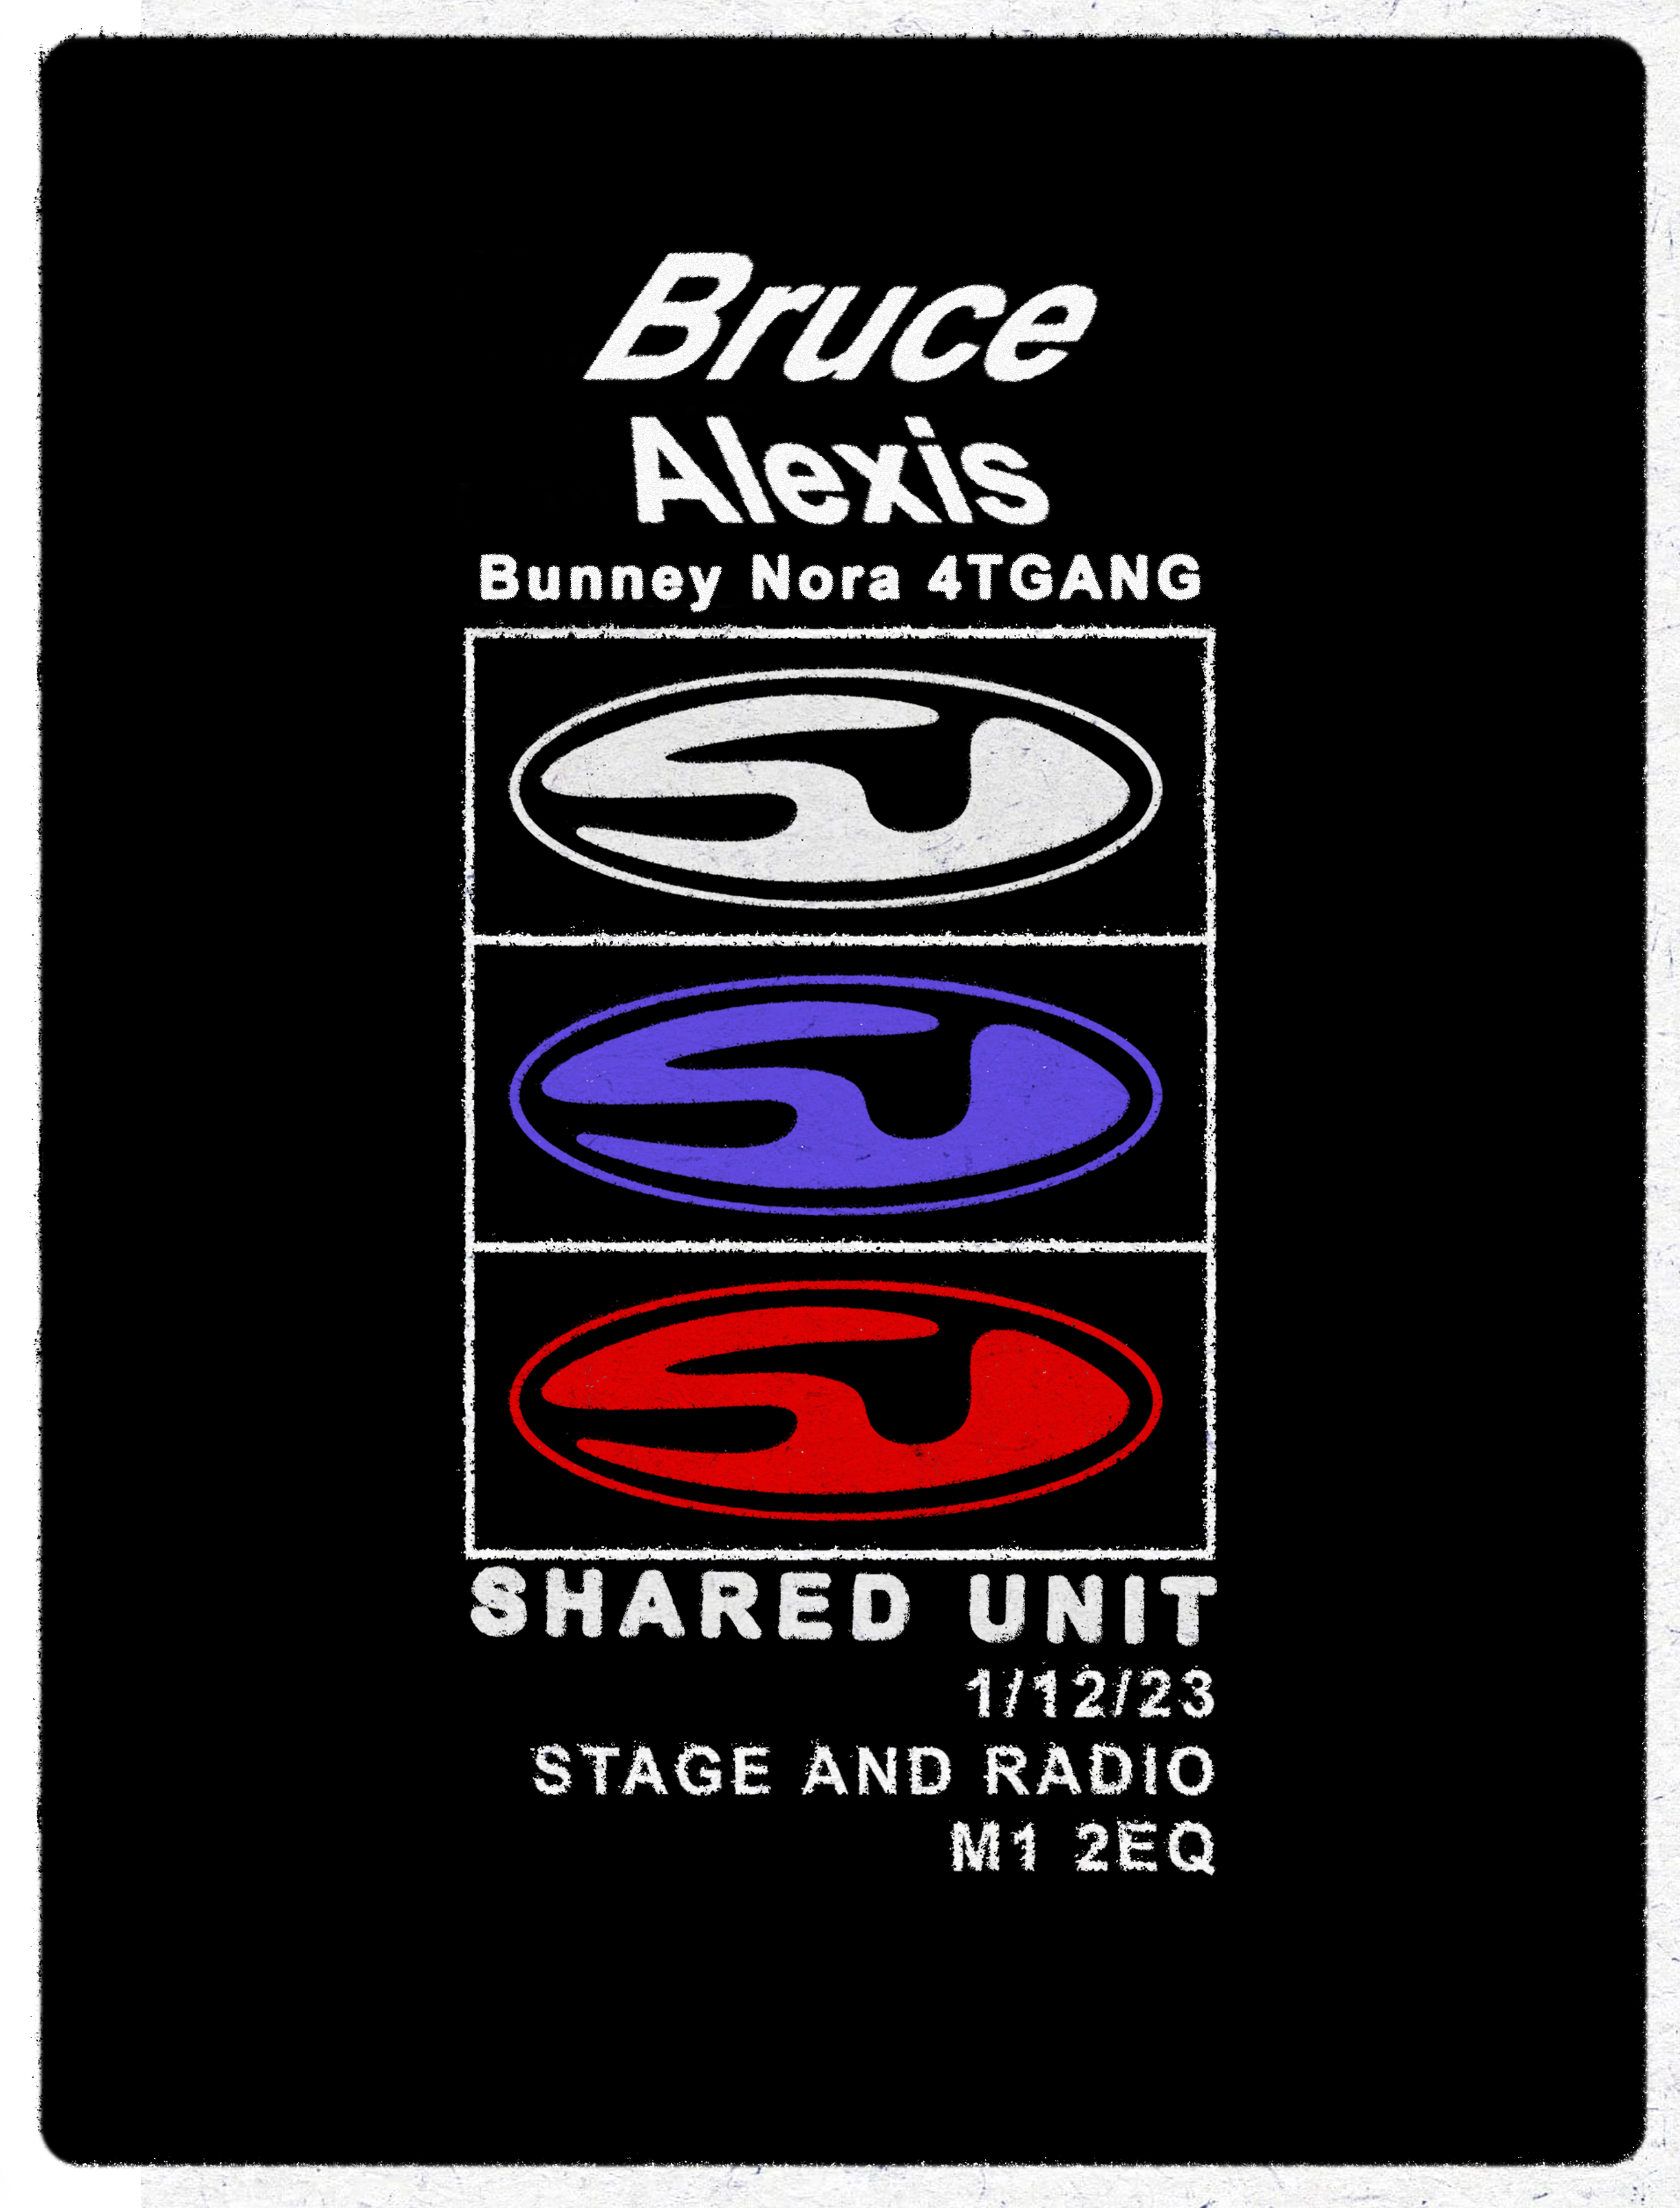 Shared Unit w/ Bruce, Alexis, Bunney, Nora, 4TGANG  - フライヤー表